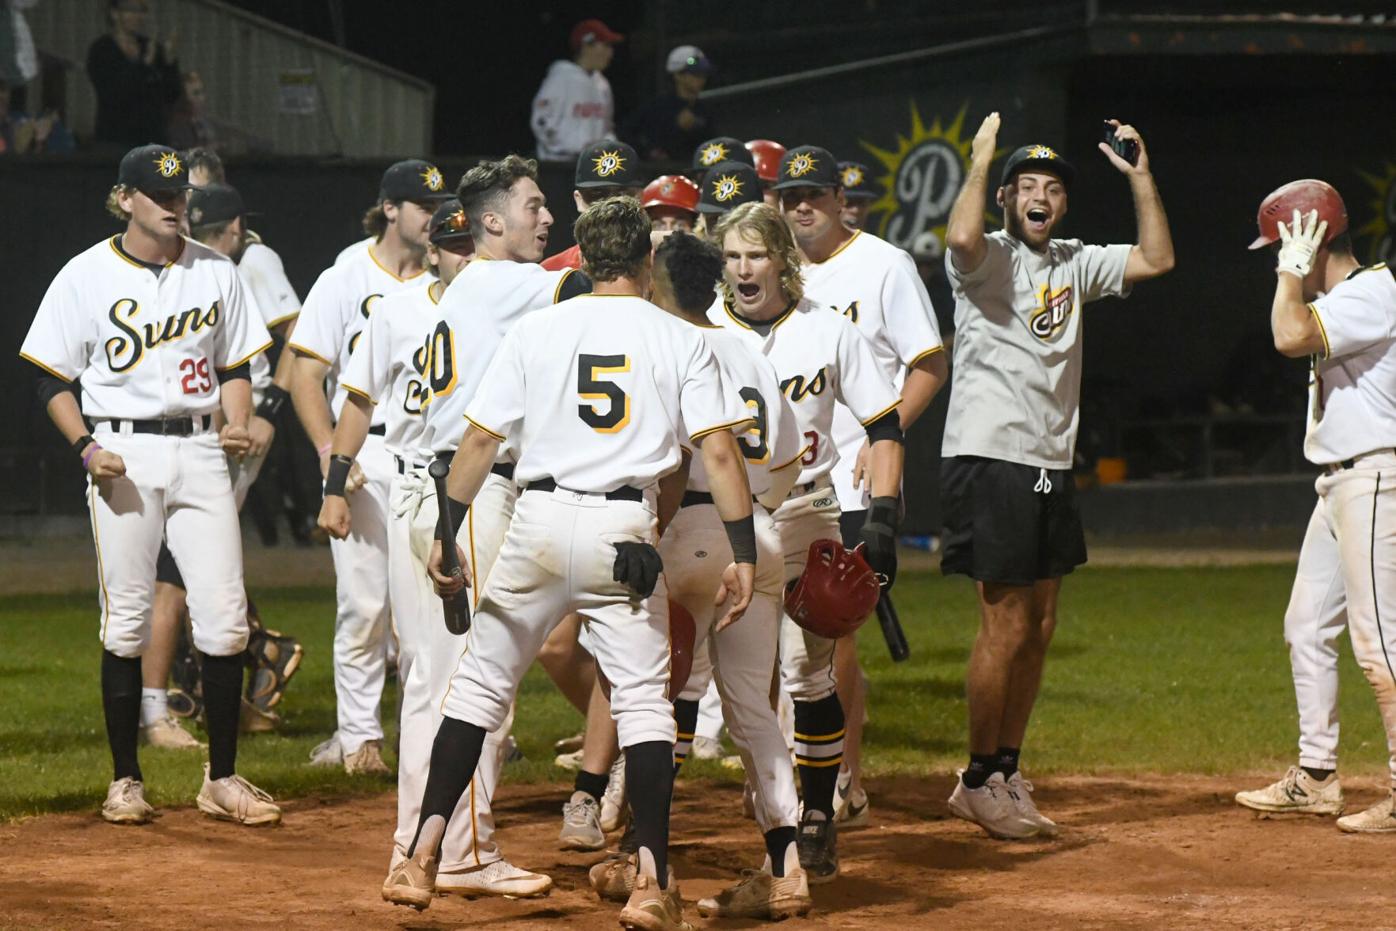 Pittsfield Suns rally to bounce Brockton Rox, will play for Futures